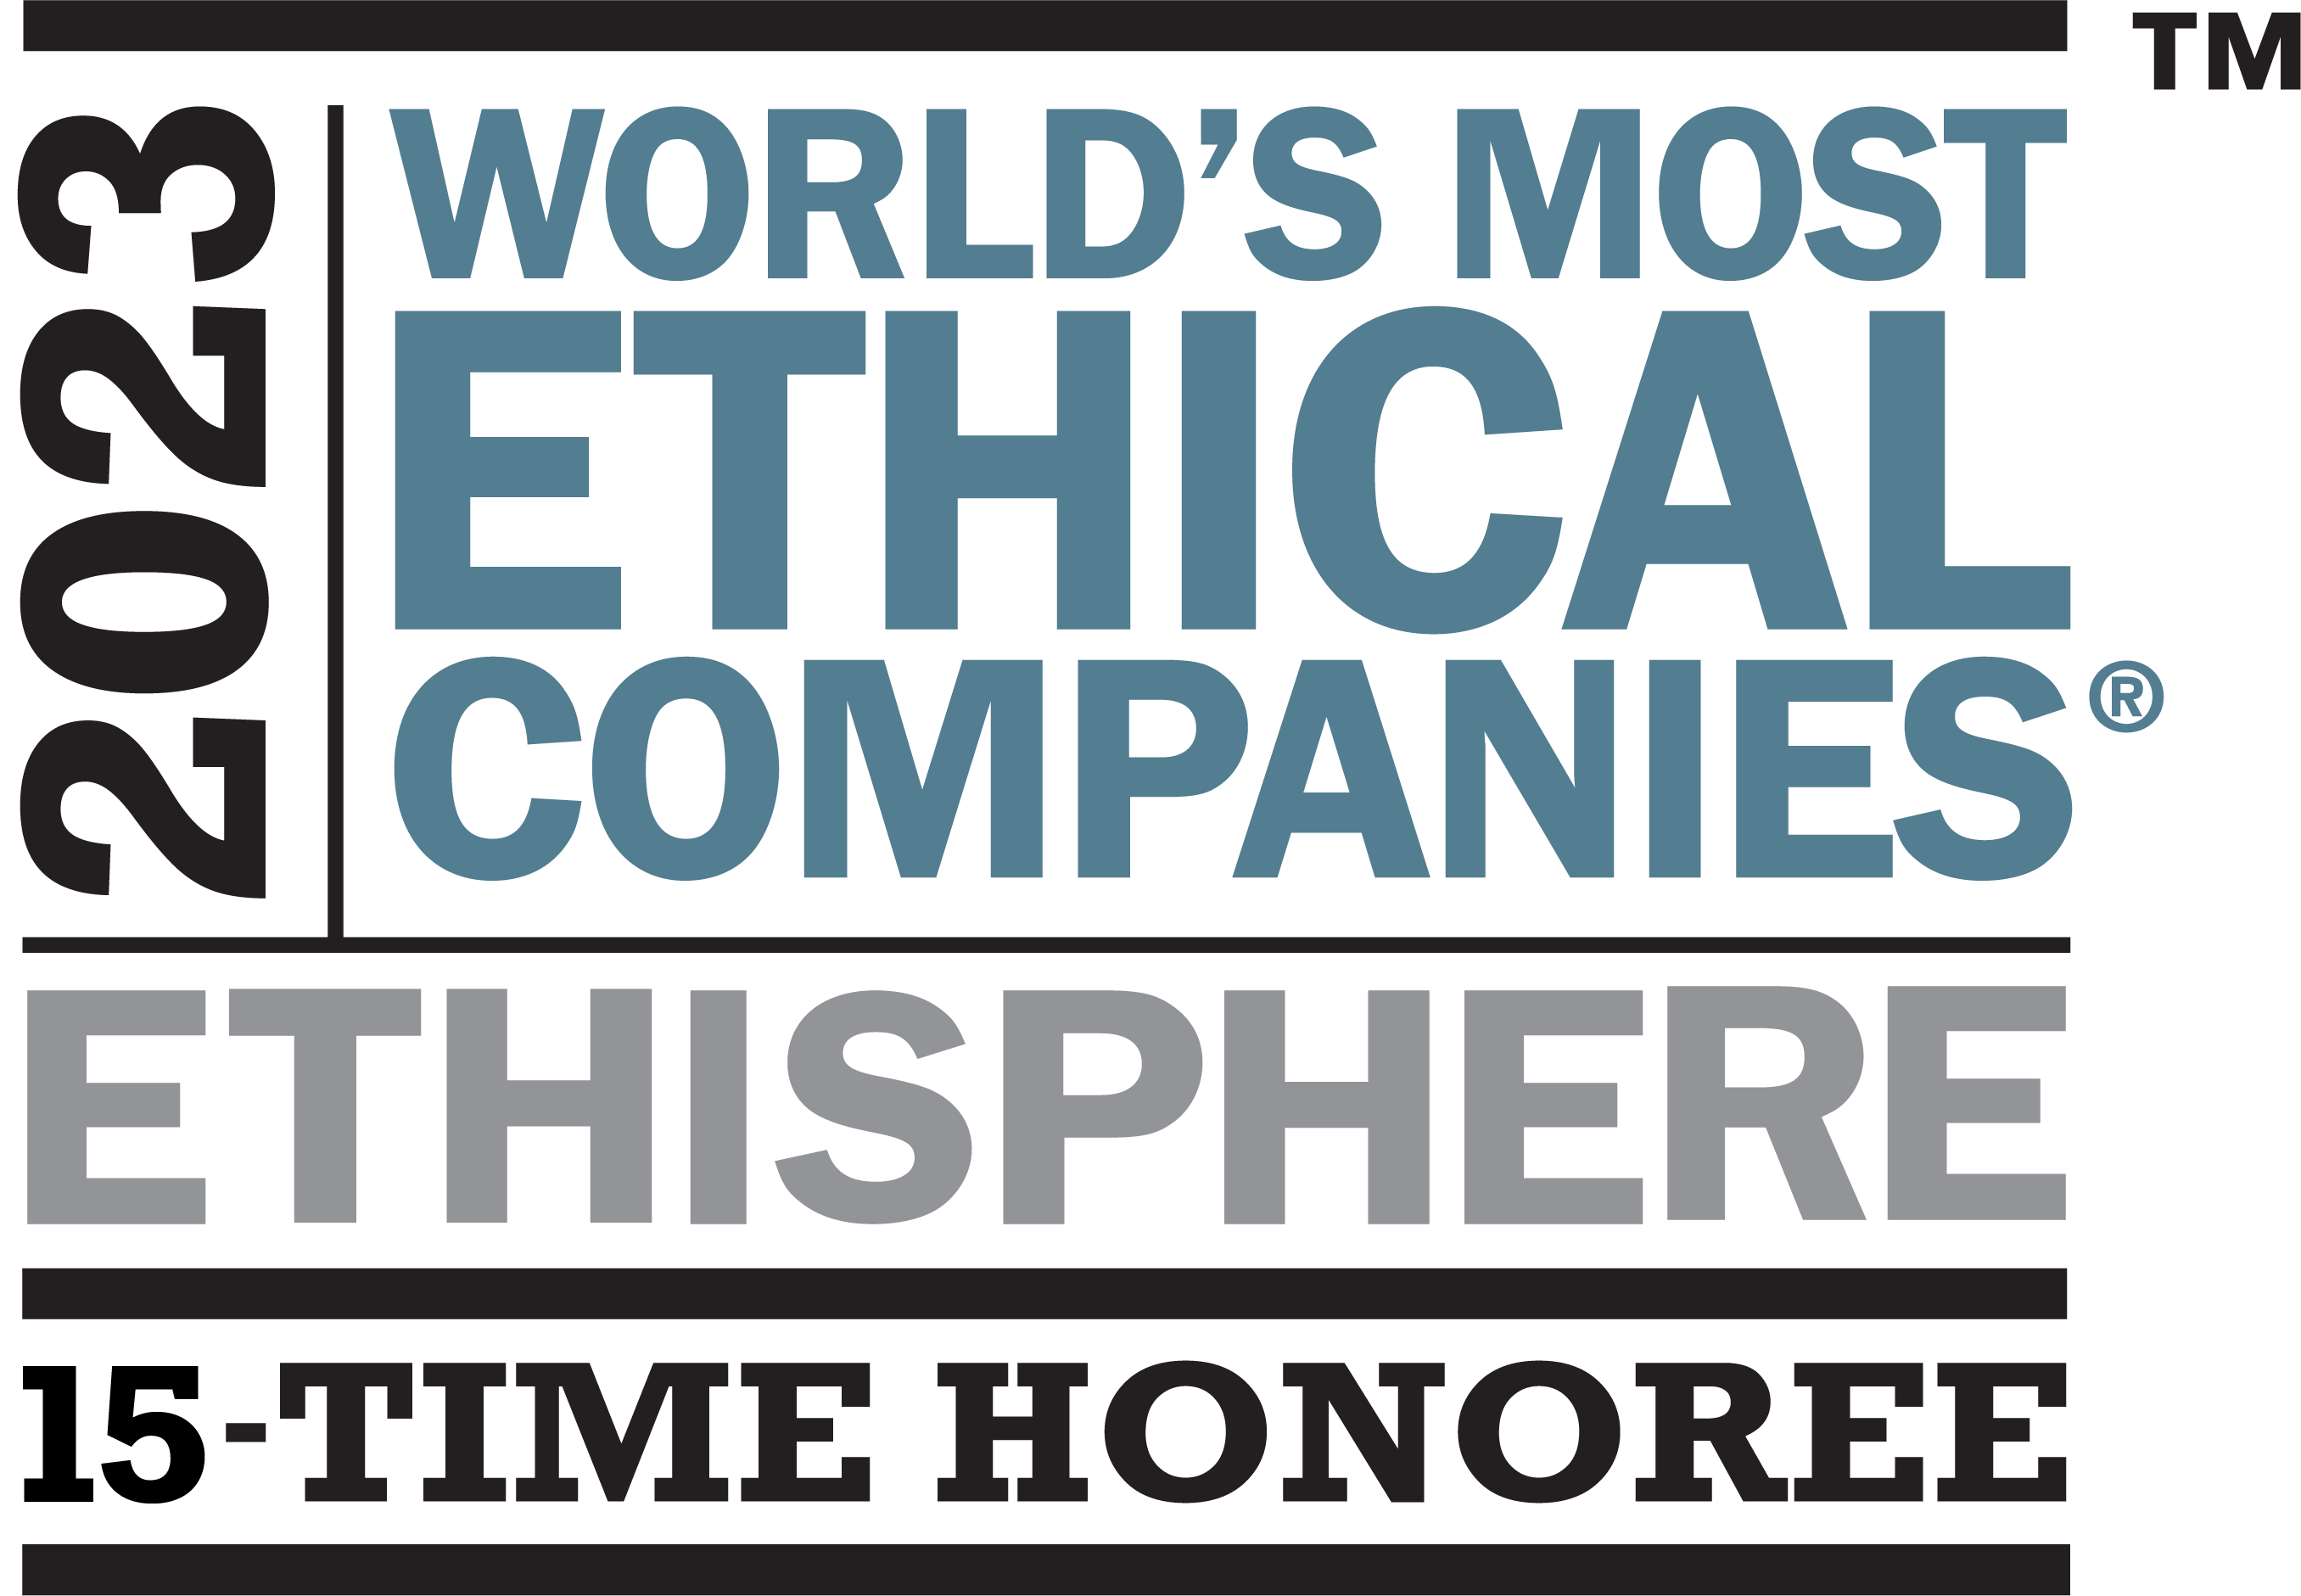 2023 World's Most Ethical Companies - Ethispere, 15-time honoree